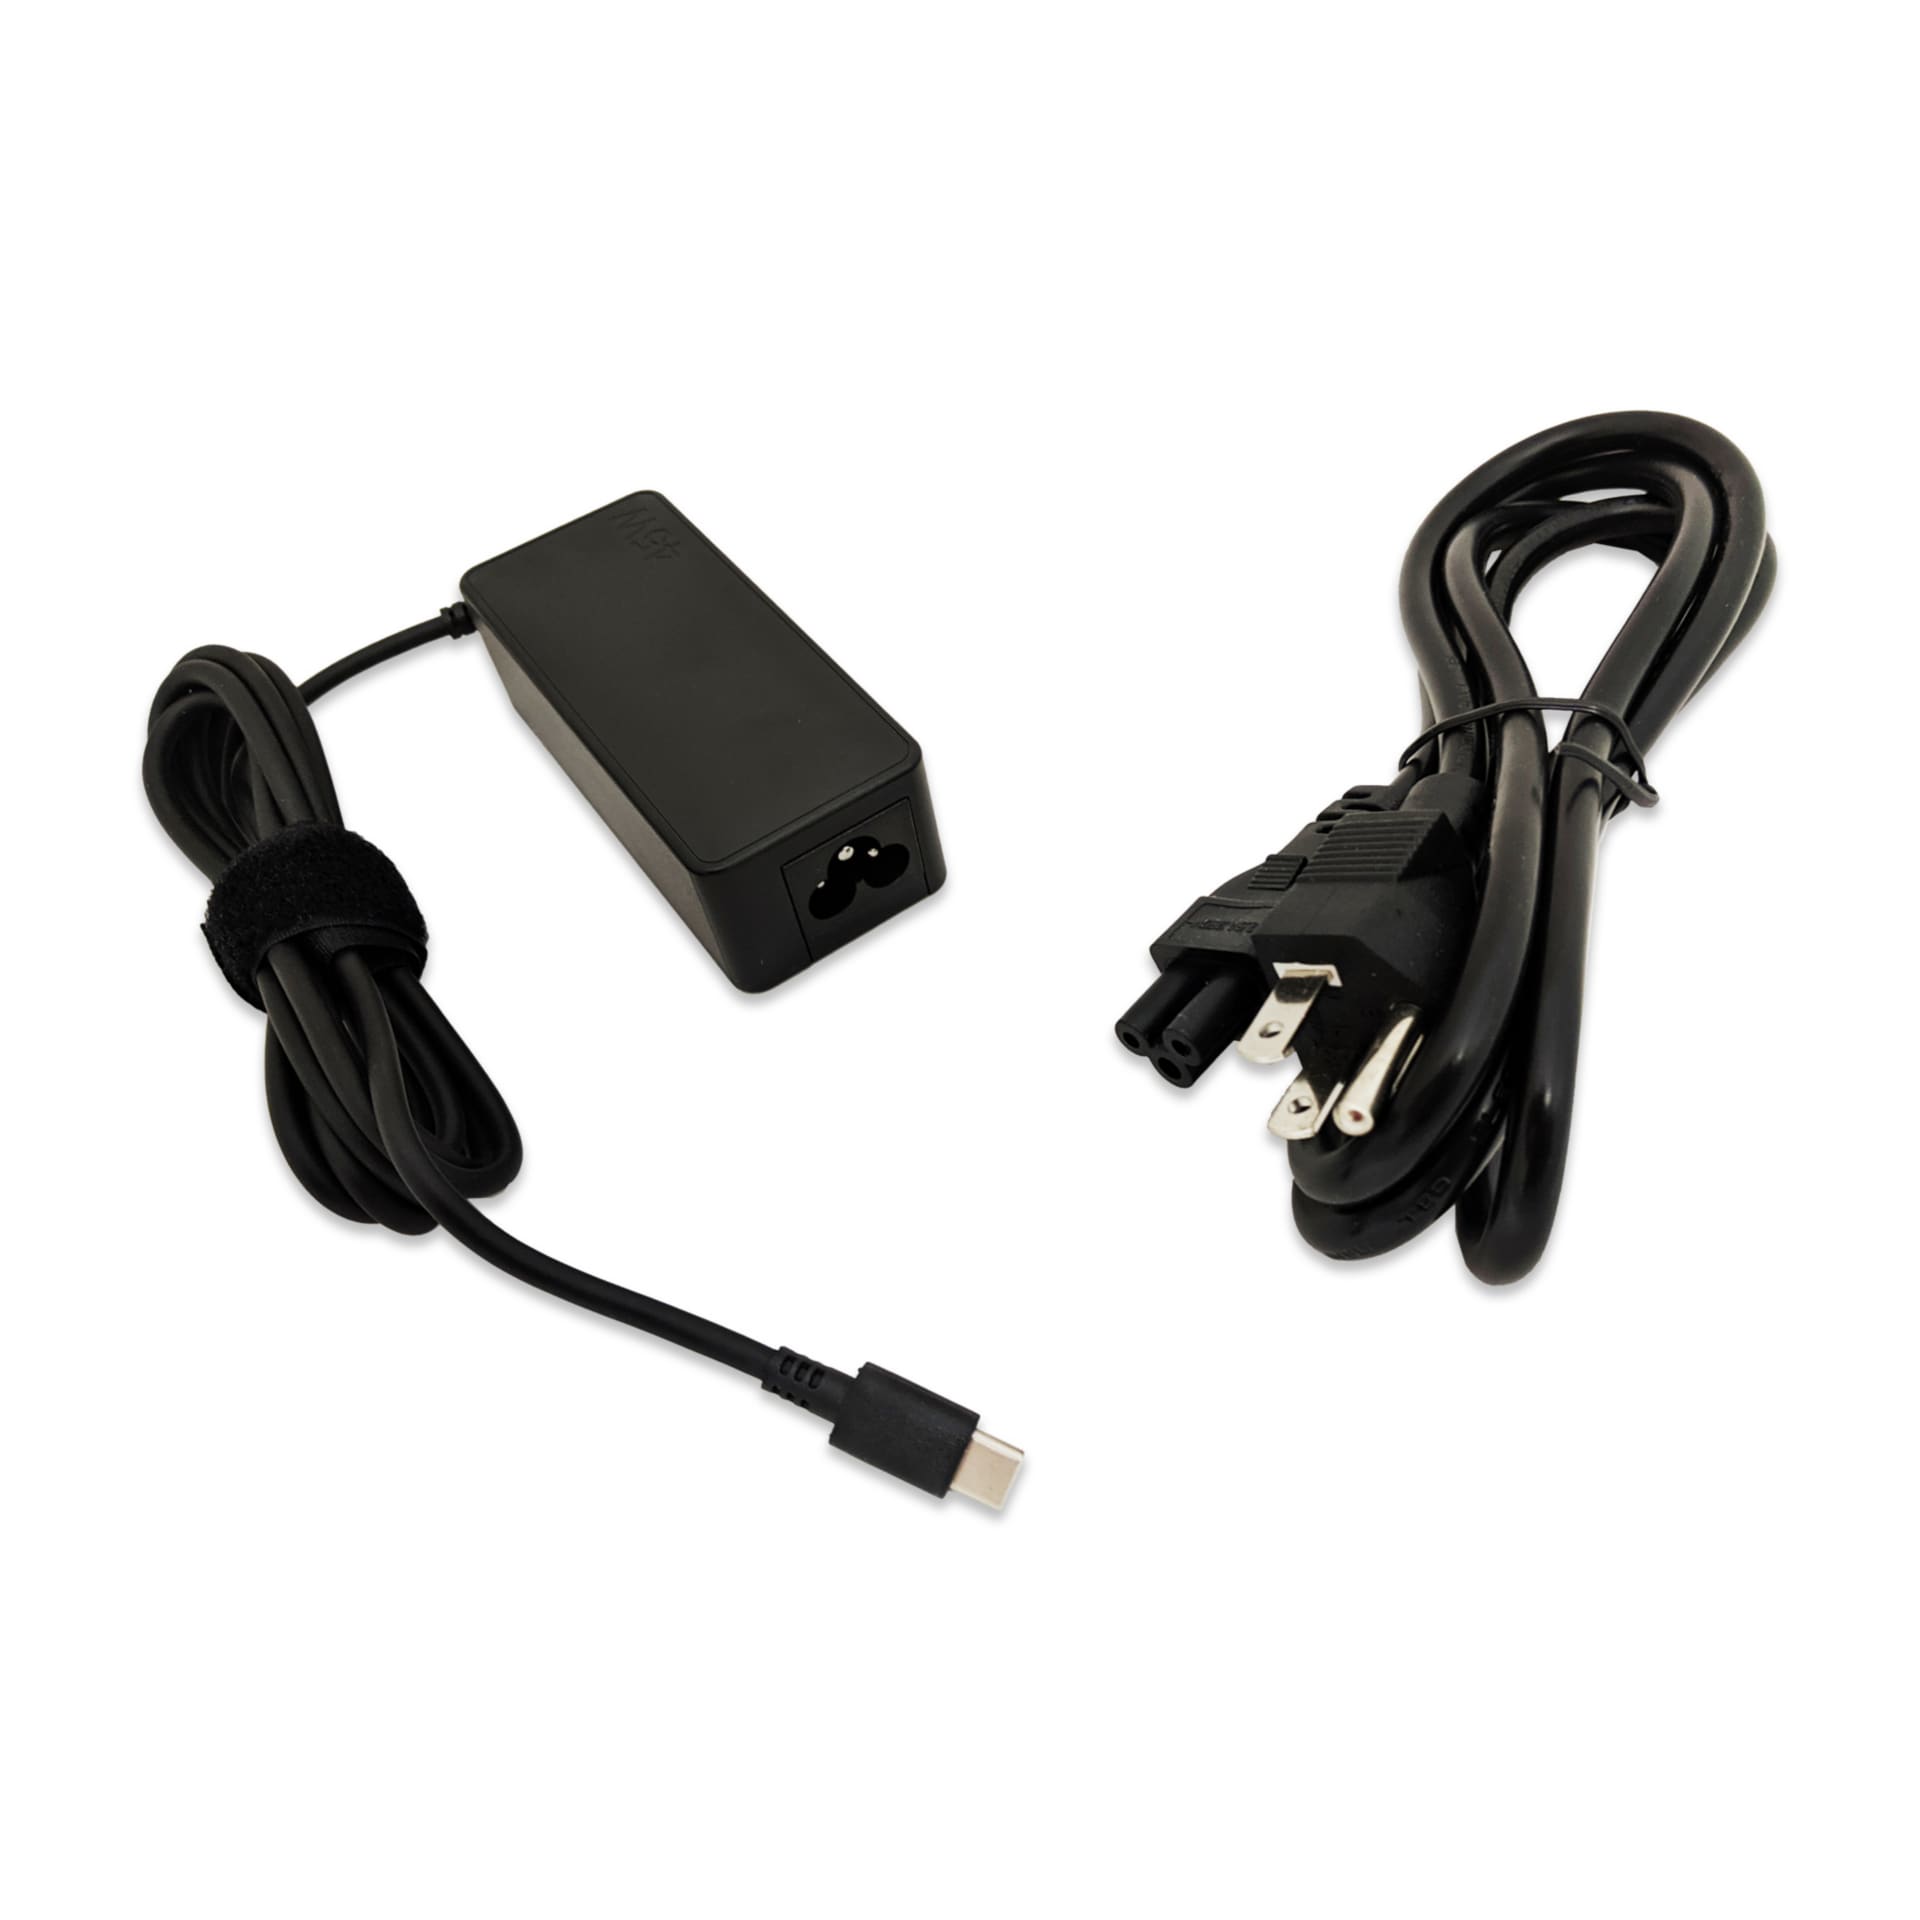 Total Micro Adapter, Lenovo ThinkPad T14 G3, T14 G4, T14s G4 - 45W USB-C -  4X20M26252-TM - Laptop Chargers & Adapters 